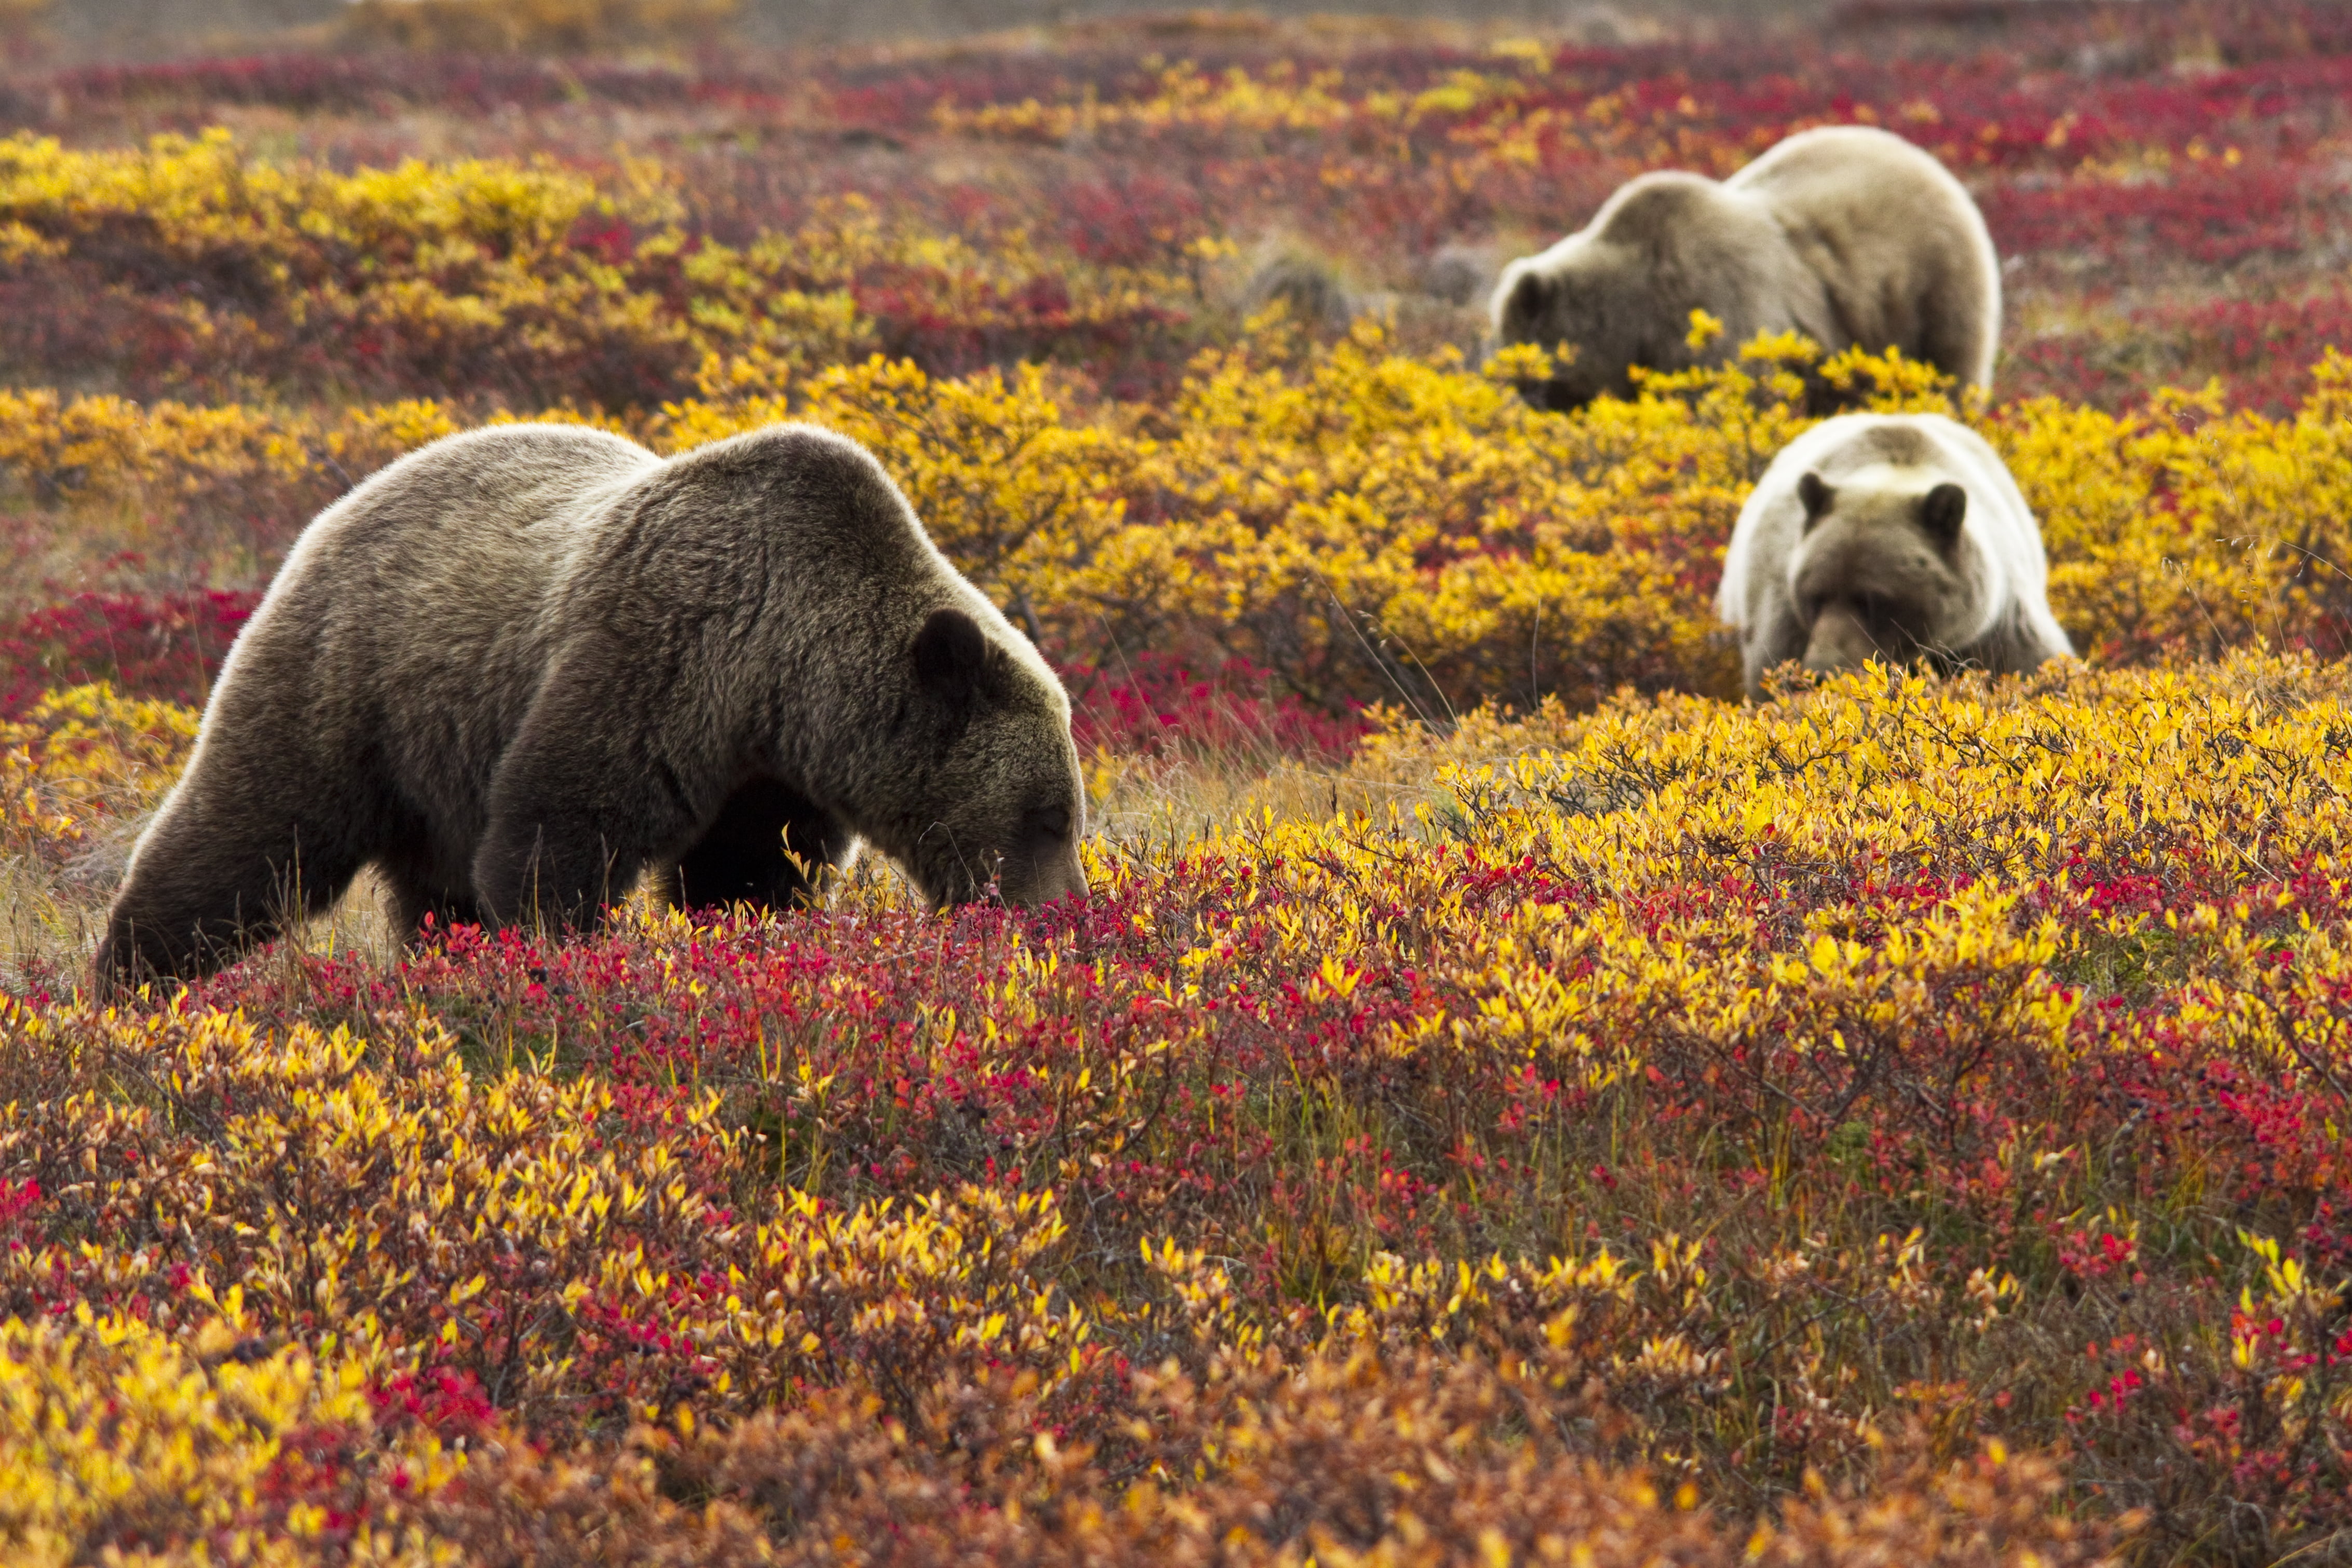 three bears on grass, grizzly bears, blueberries, grizzly bears, blueberries